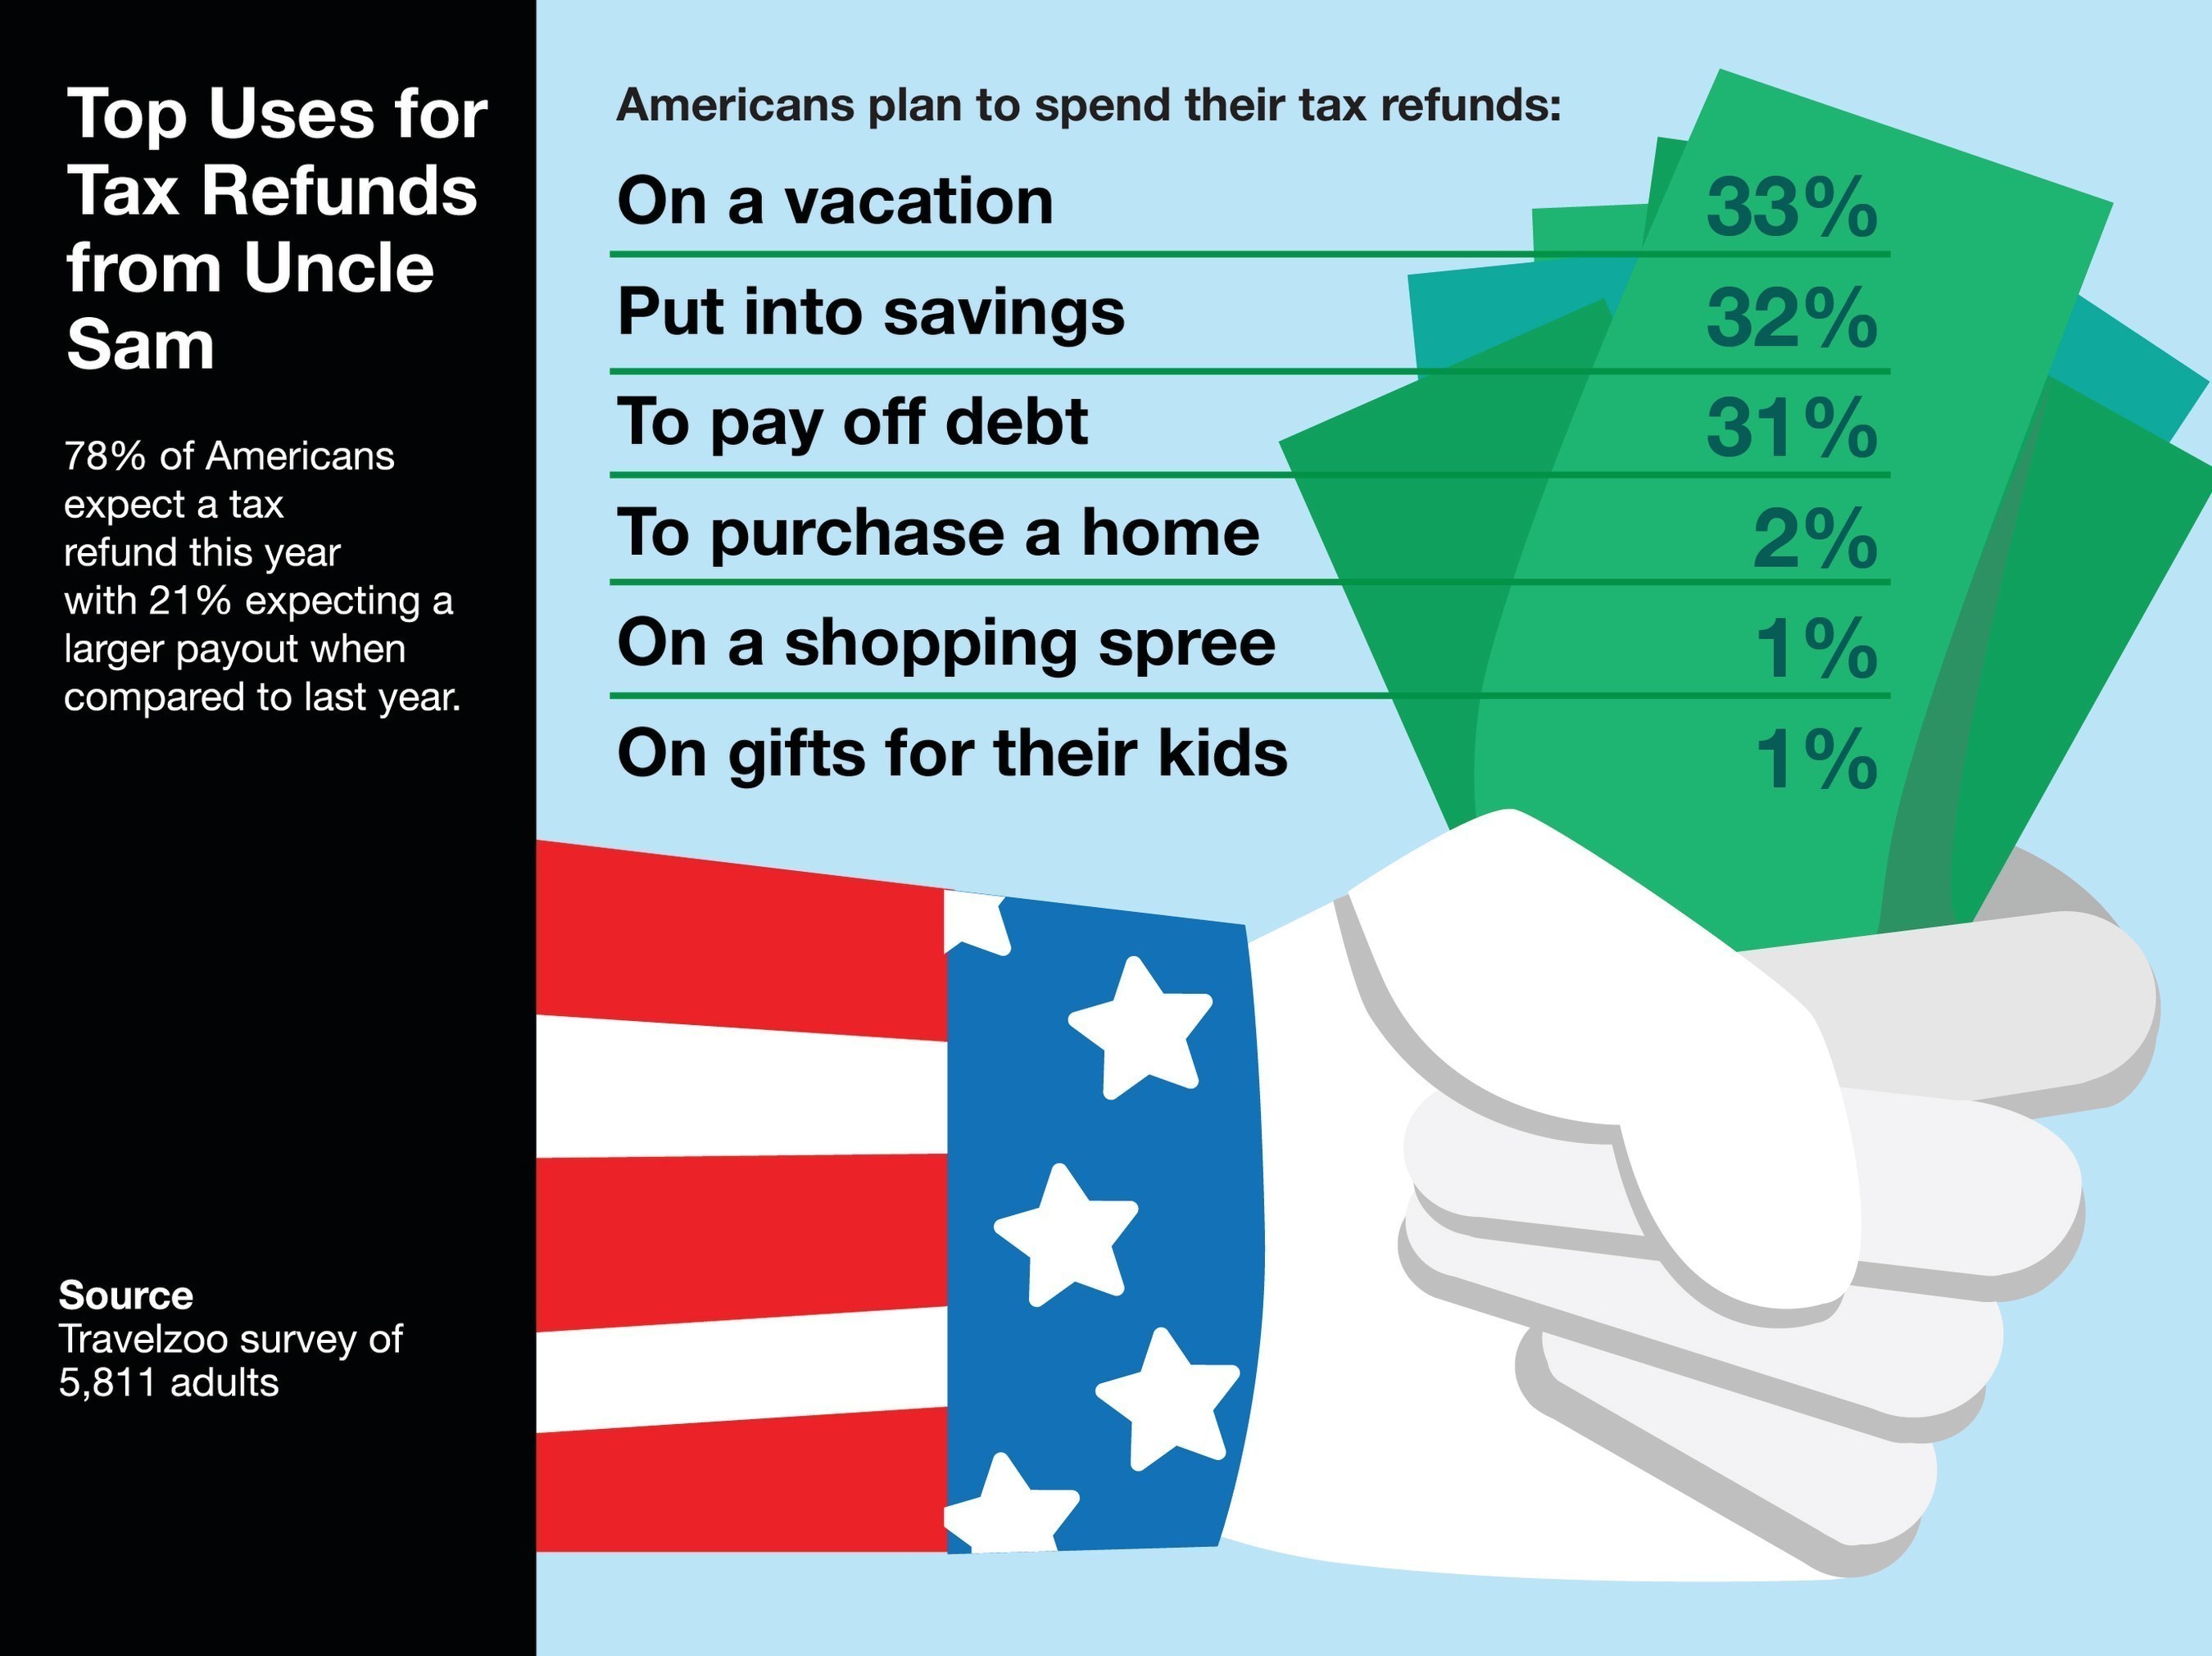 Top Uses for Tax Refunds from Uncle Sam